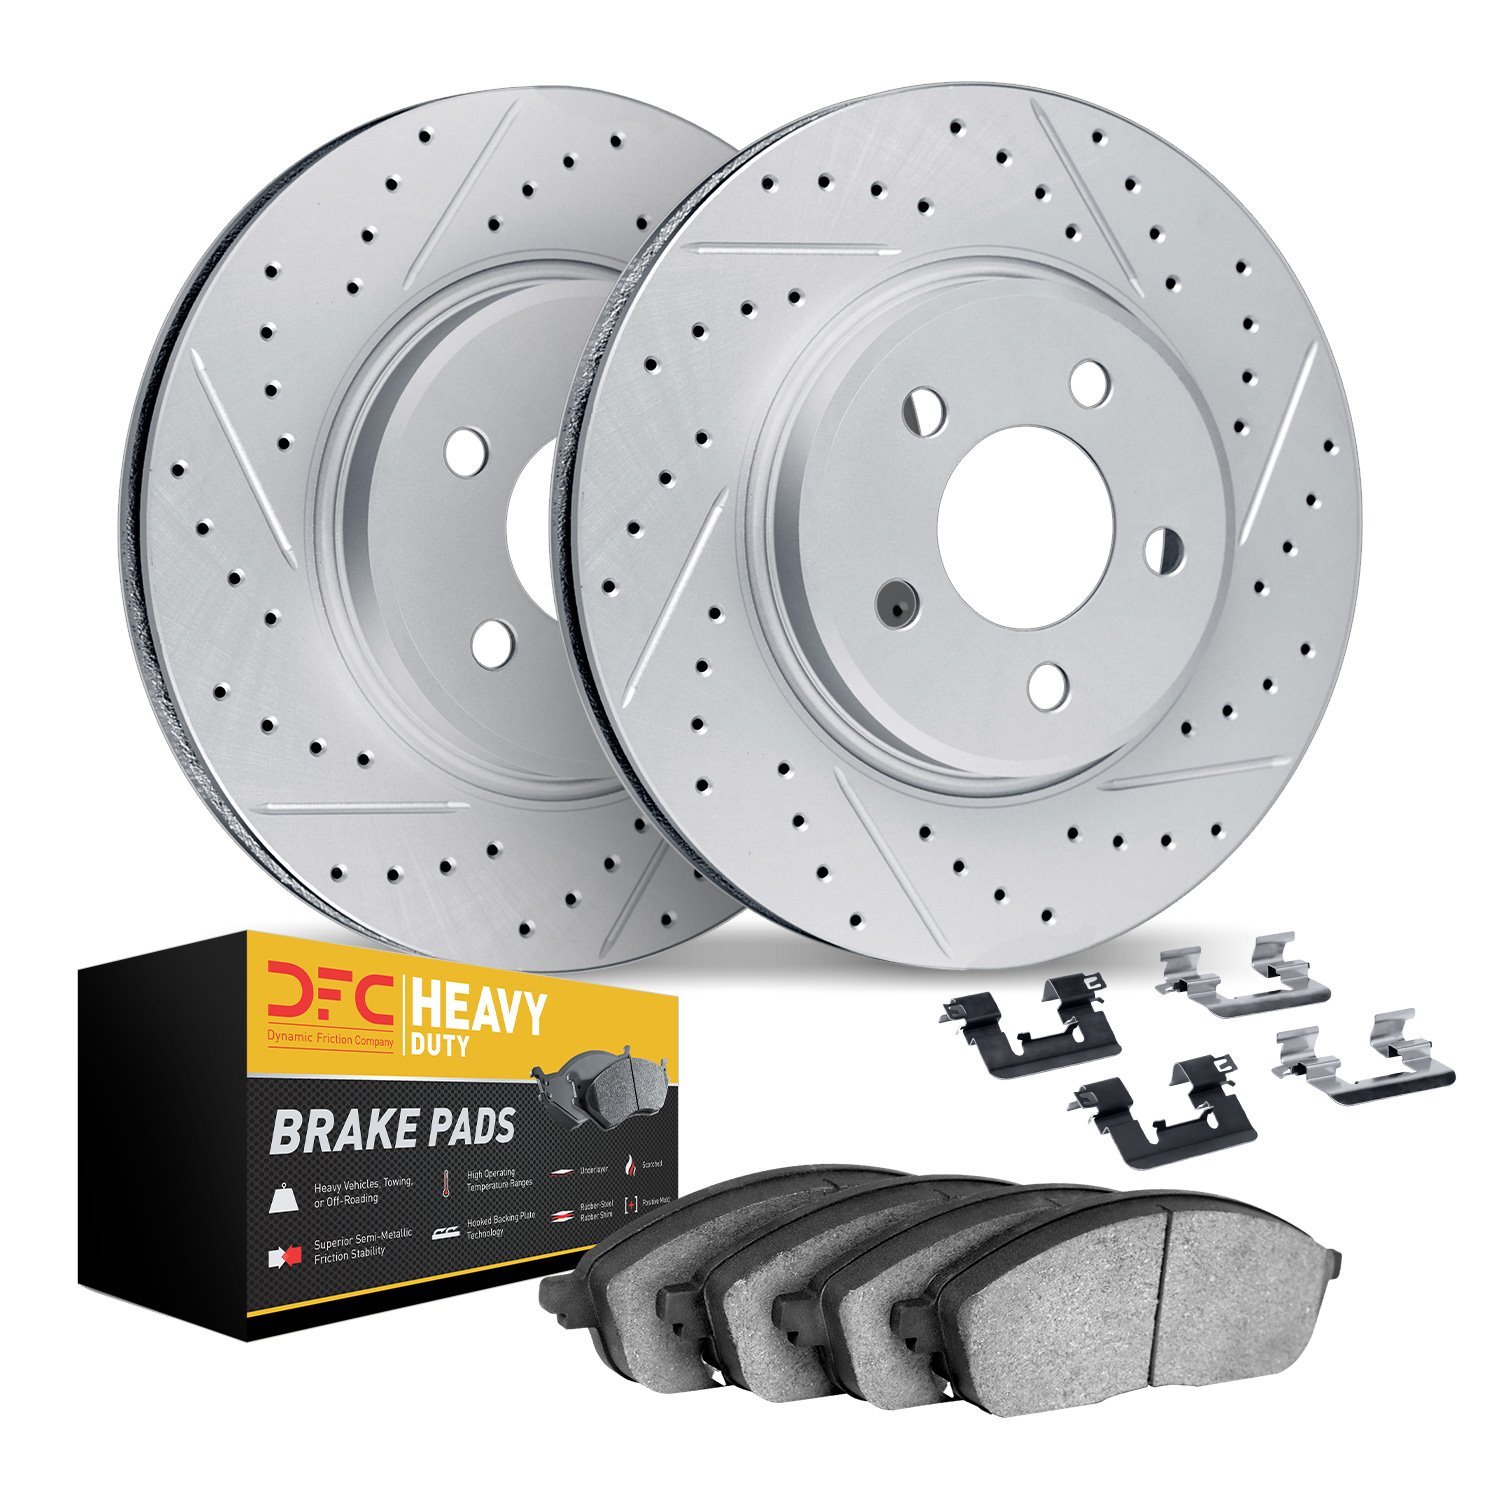 2212-99108 Geoperformance Drilled/Slotted Rotors w/Heavy-Duty Pads Kit & Hardware, 1998-2002 Ford/Lincoln/Mercury/Mazda, Positio